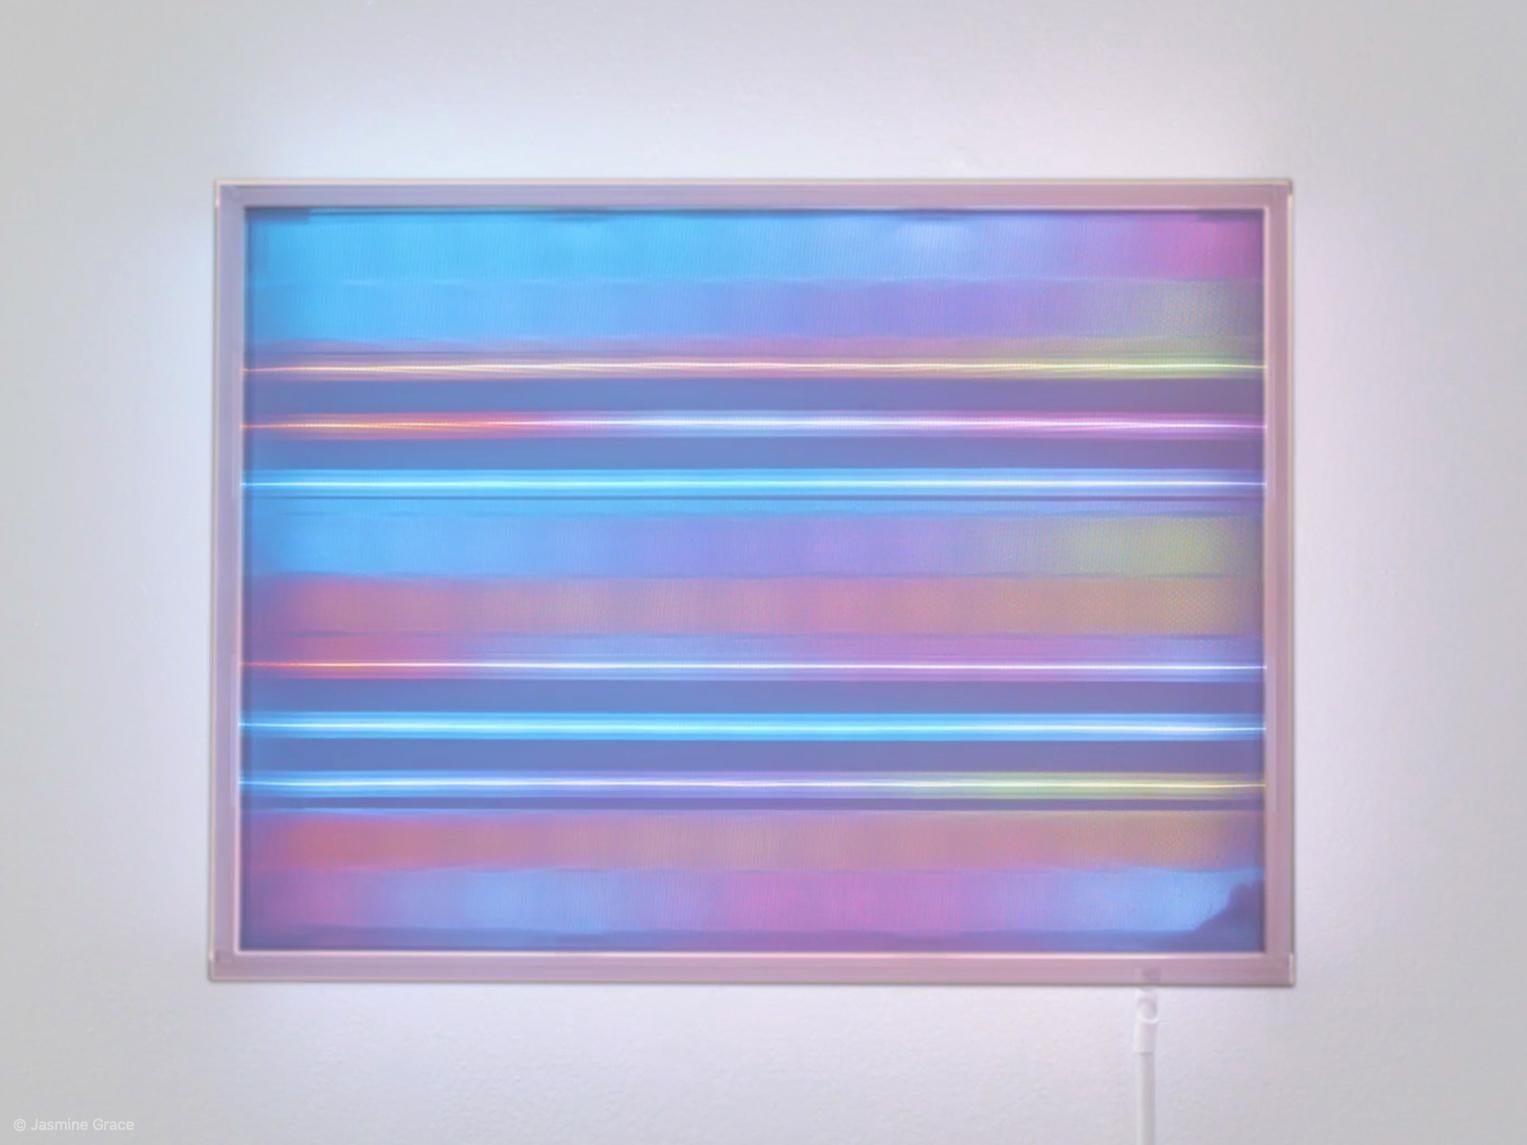 Ebb and Flow - Horizontal stripe, LED Enabled Wall Art, 2021 - Abstract Mixed Media Art by Jasmine Pilcher